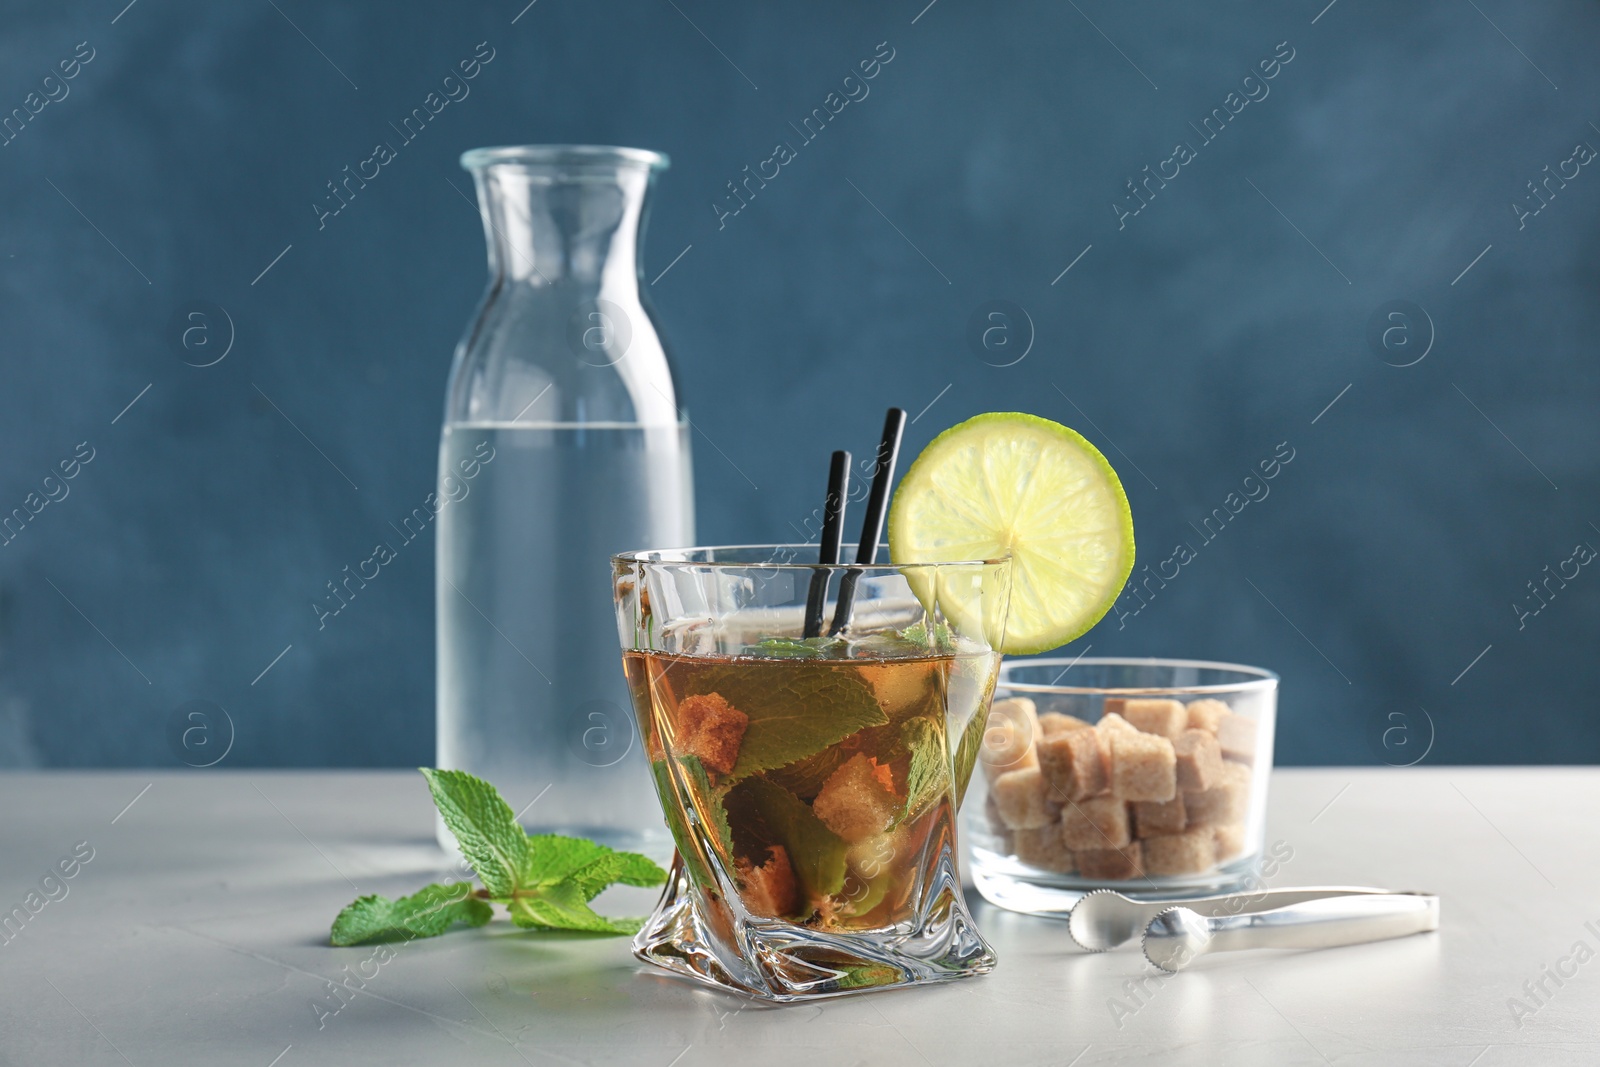 Photo of Glass of delicious mint julep cocktail on table